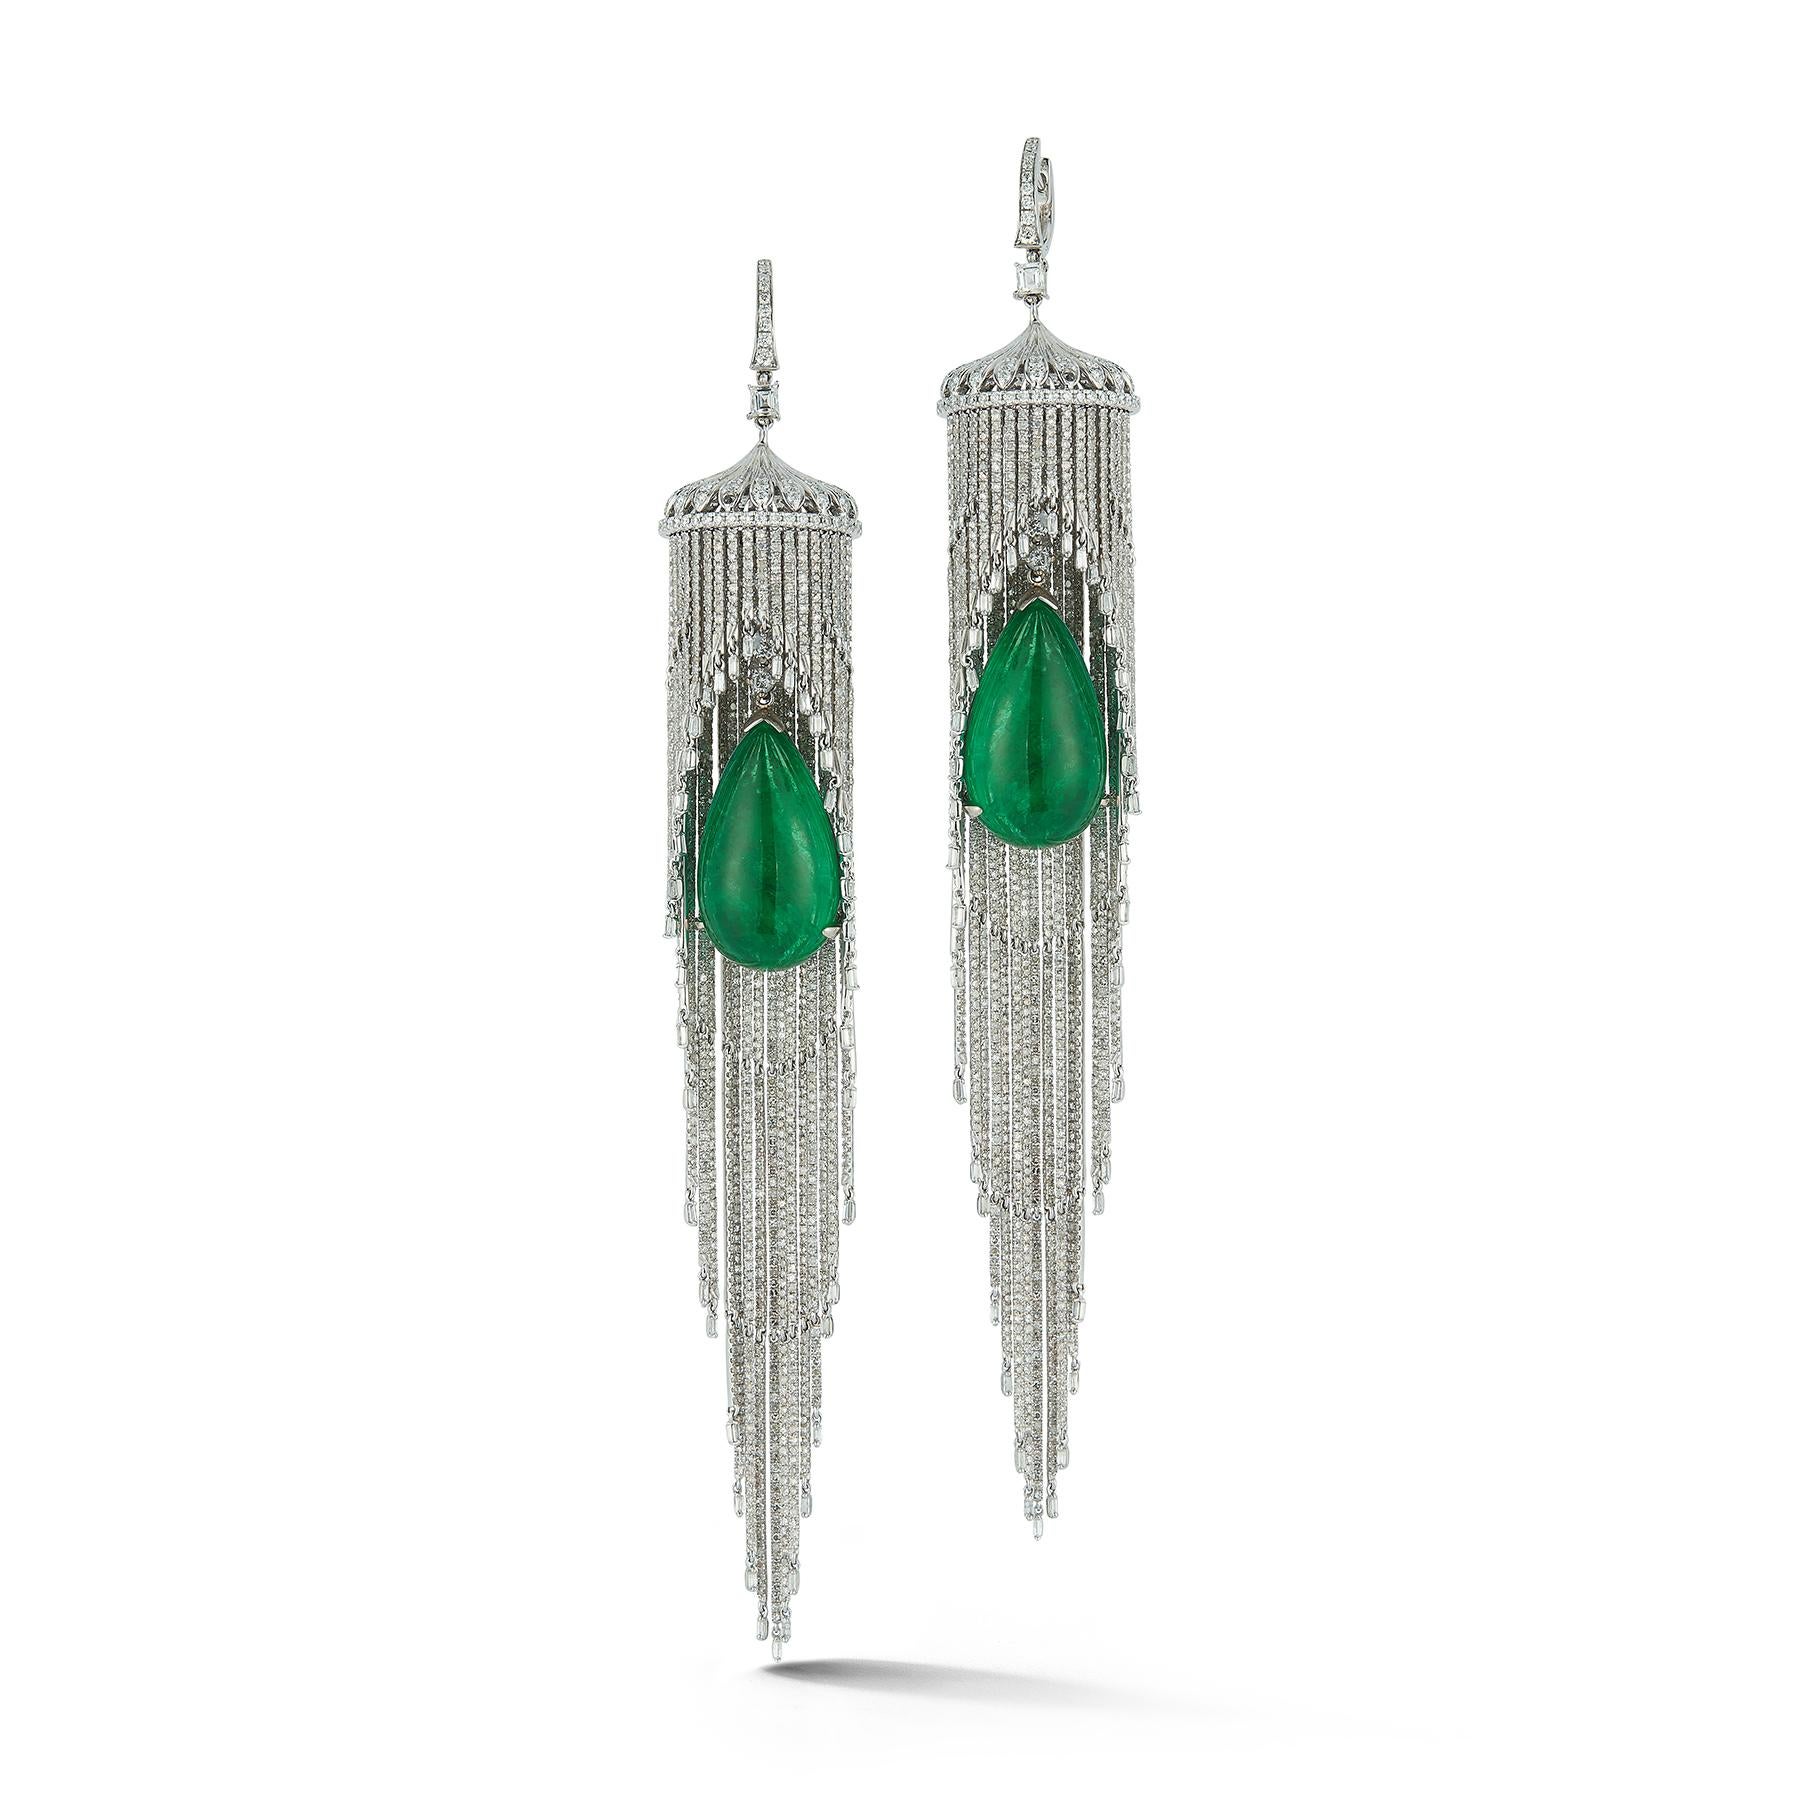 Emerald and Diamond Chandelier Earrings
The Emeralds are 26.08 ct, 26.78 ct respectively 
18.47 ct of Diamonds 